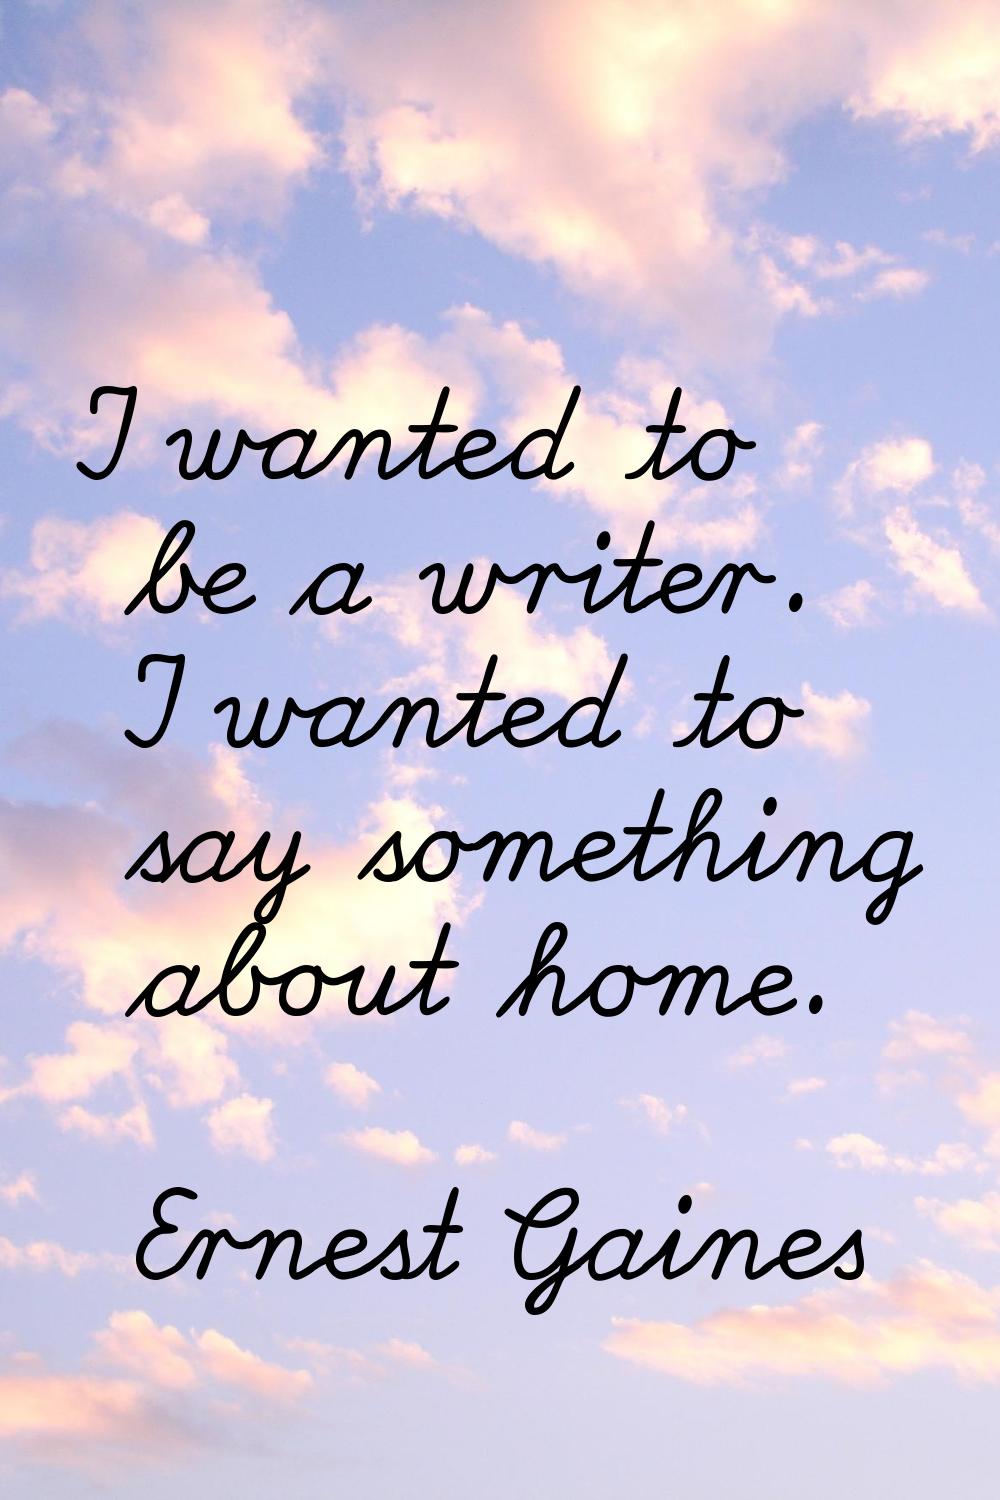 I wanted to be a writer. I wanted to say something about home.